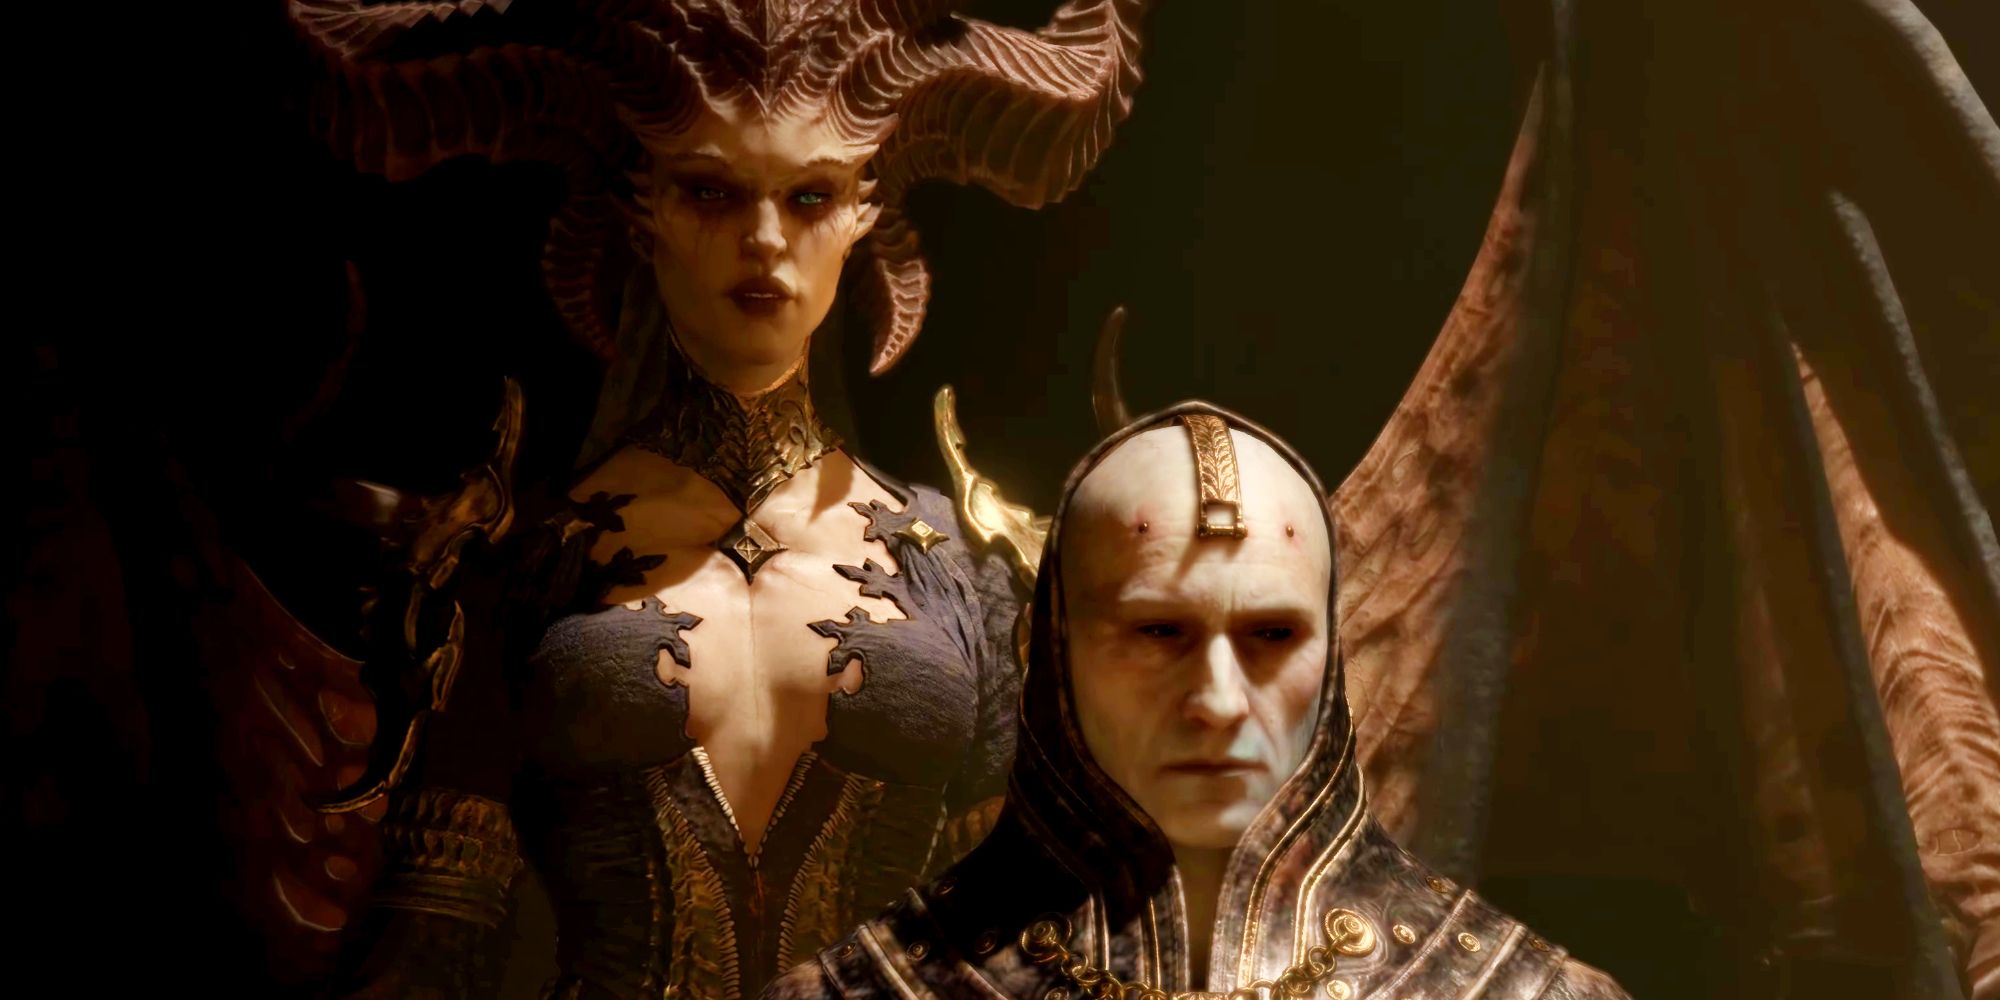 Lilith standing behind and towering over Elias in a cutscene from Diablo 4.